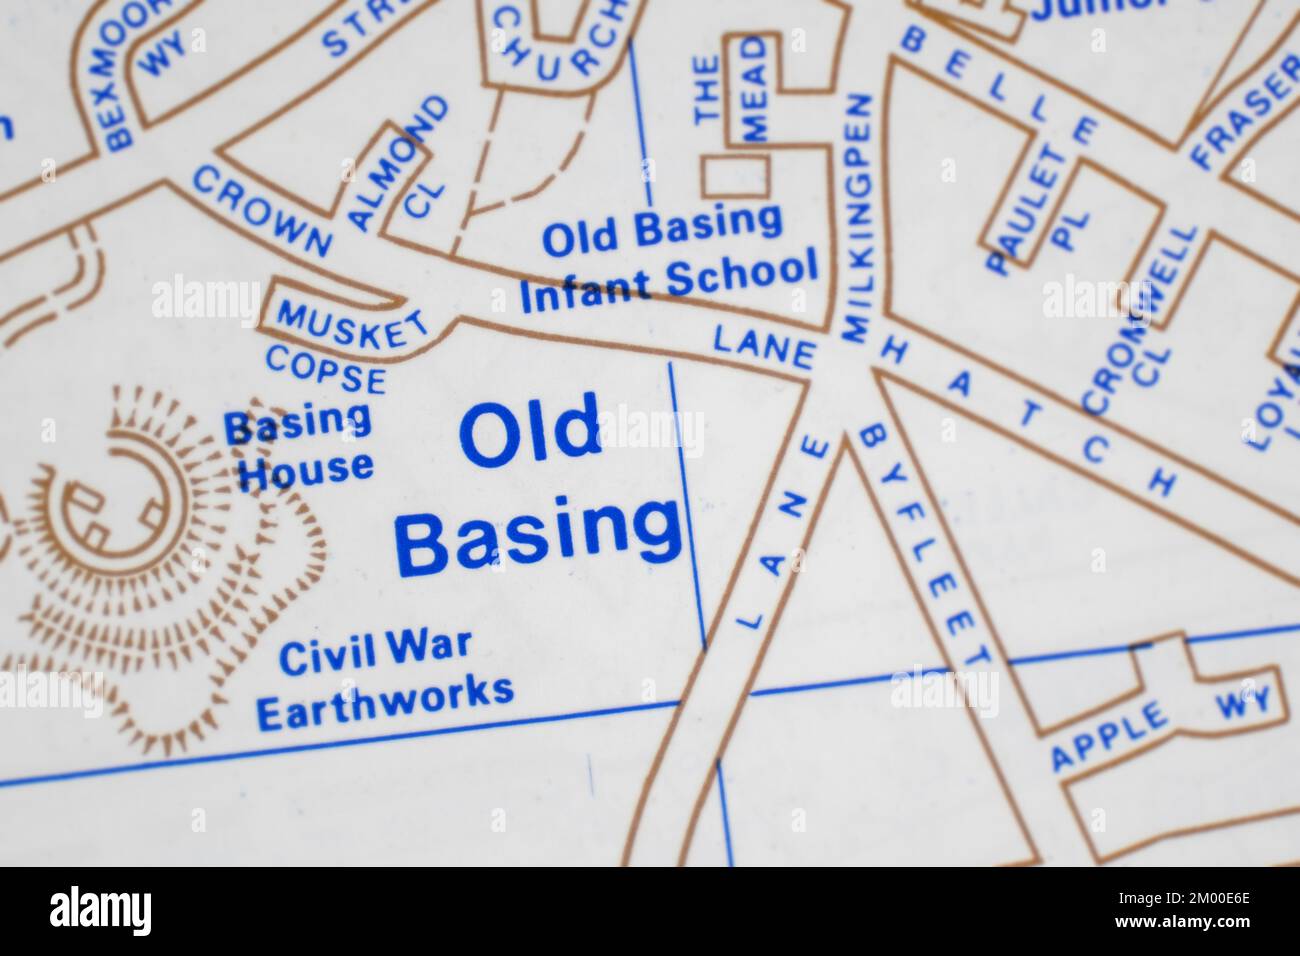 Old Basing village in Hampshire, United Kingdom atlas map town name Stock Photo